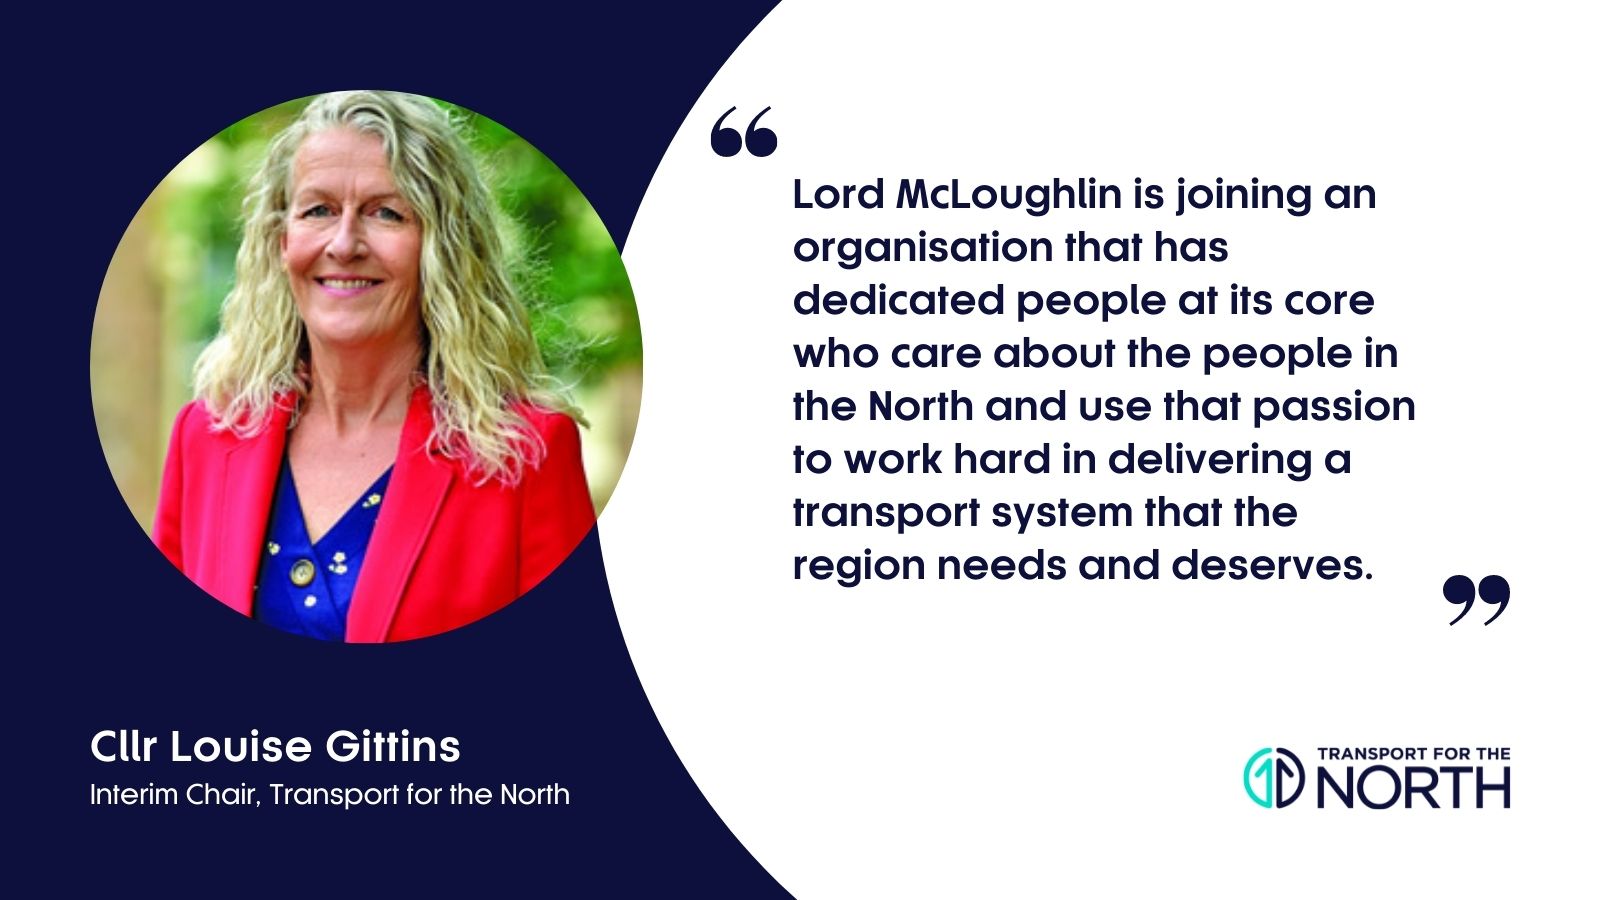 Cllr Louise Gittins, Interim Chair of Transport for the North on the appointment of Lord McLoughlin